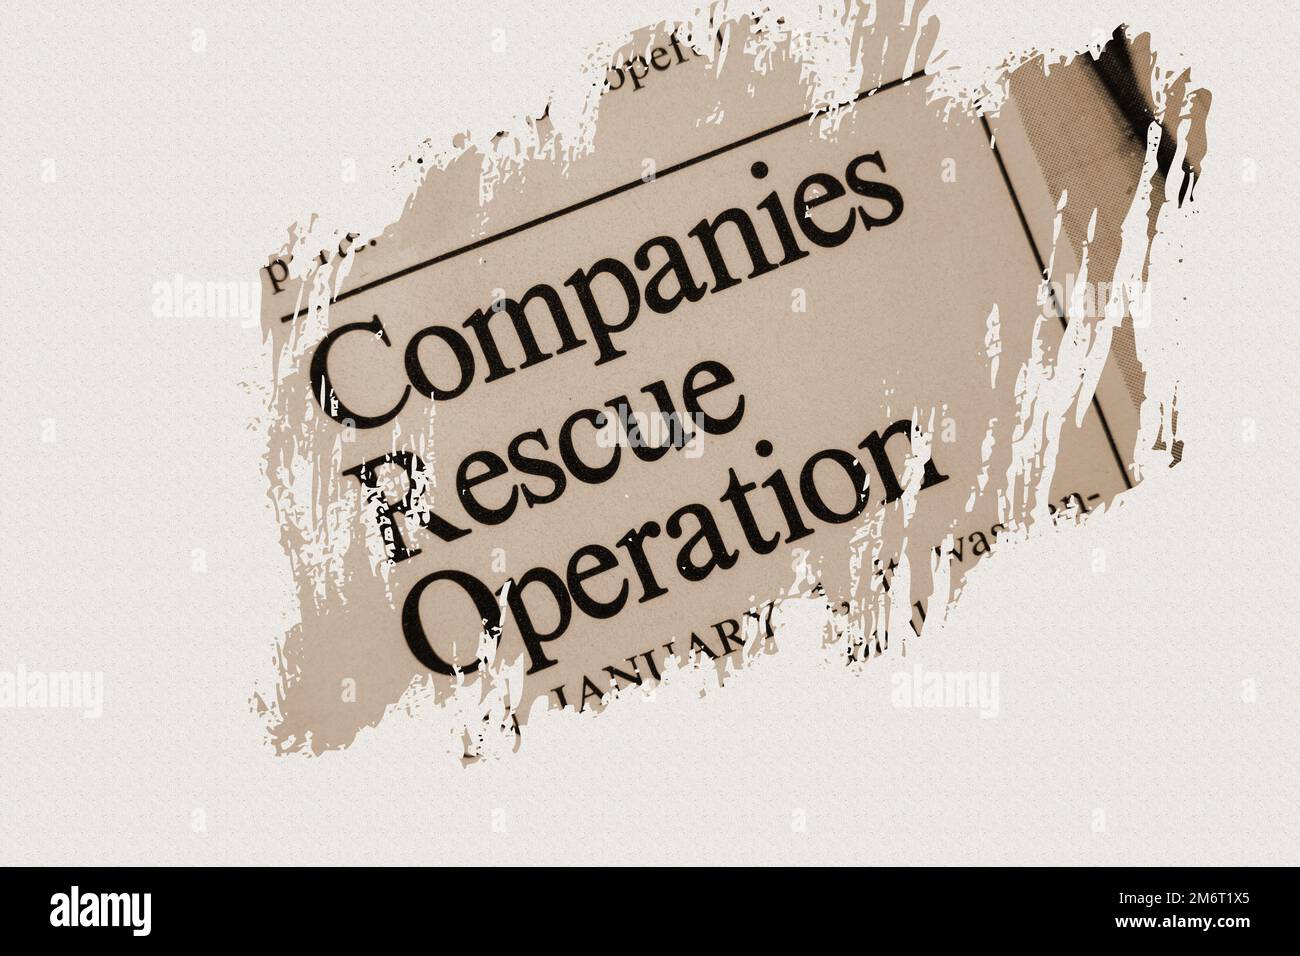 news story from 1975 newspaper headline article title - Companies Rescue Operation in sepia Stock Photo